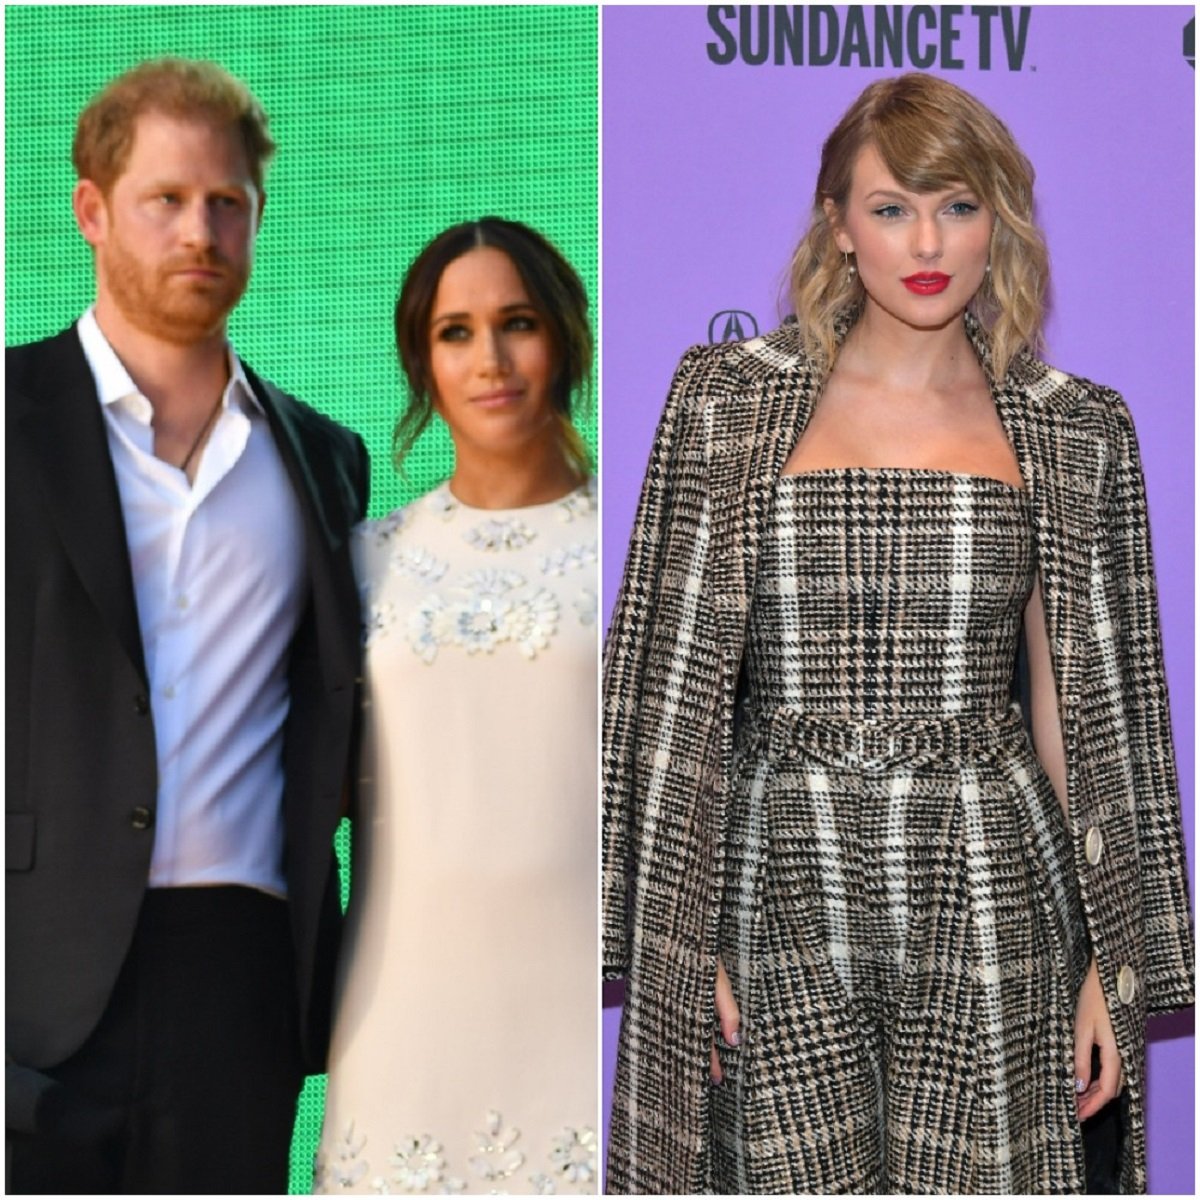 (L) Prince Harry and Meghan Markle onstage at Global Citizen Live Event, (R) Taylor Swift poses on red carpet at Sundance Film Festival